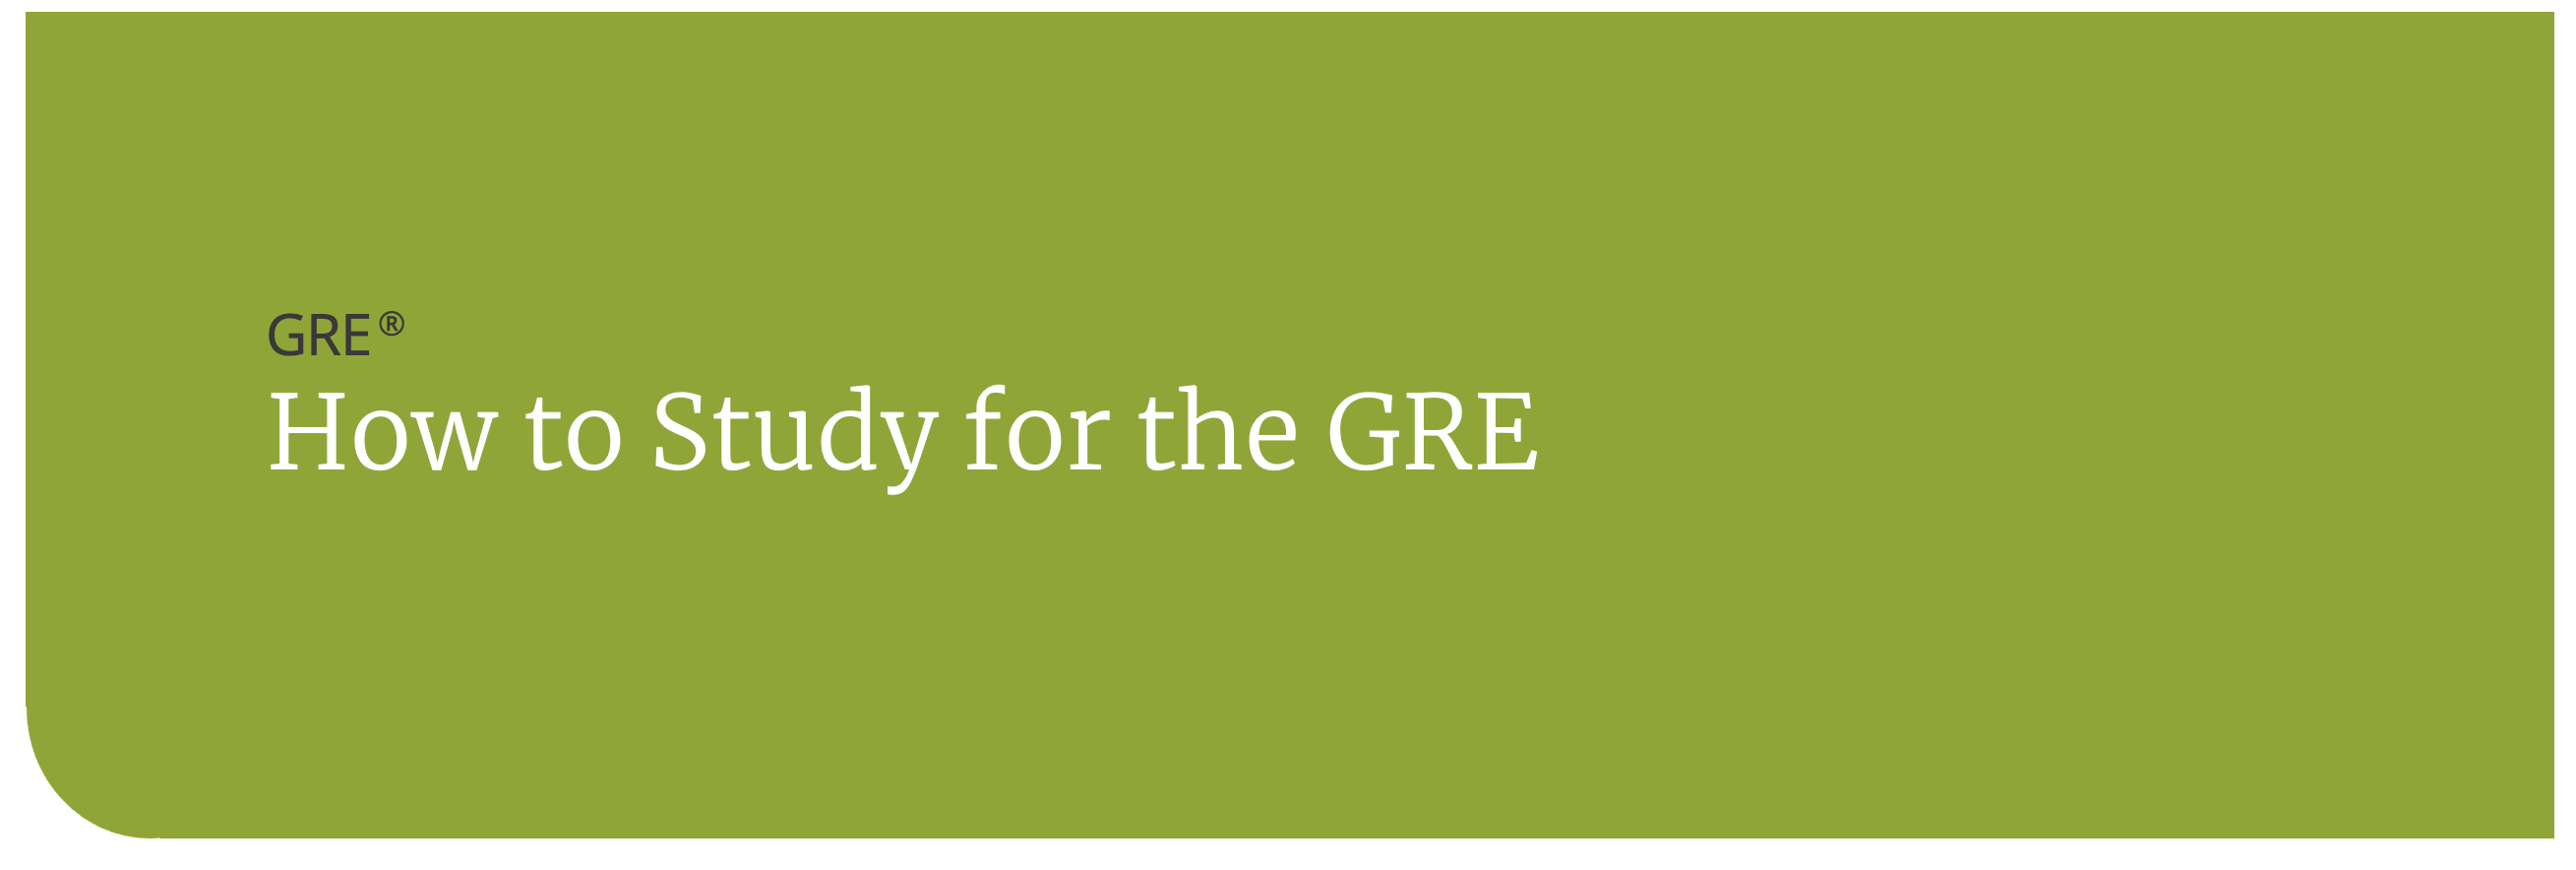 How to Study for the GRE